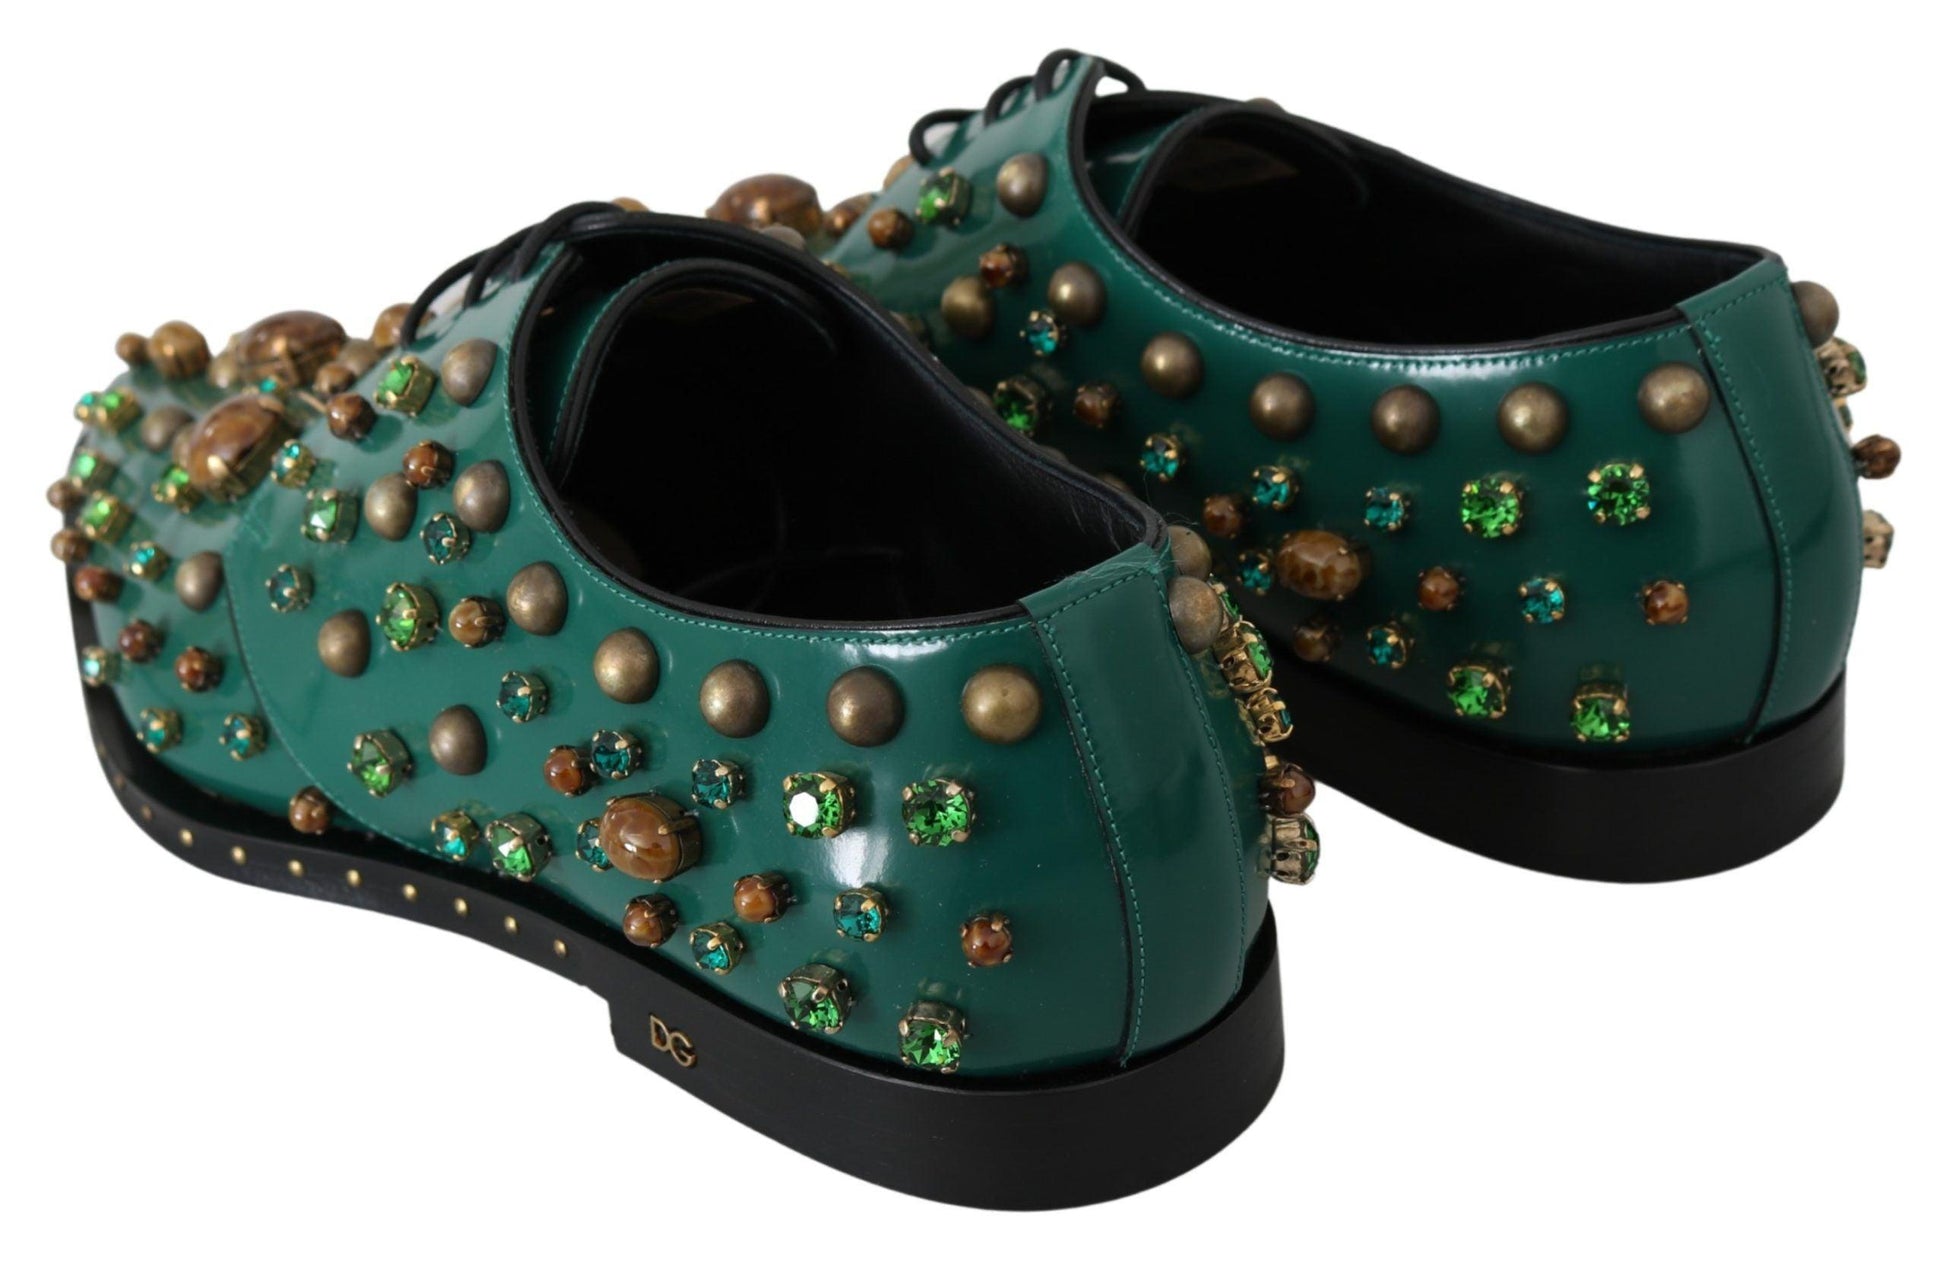 Dolce & Gabbana Emerald Leather Dress Shoes with Crystal Accents - PER.FASHION